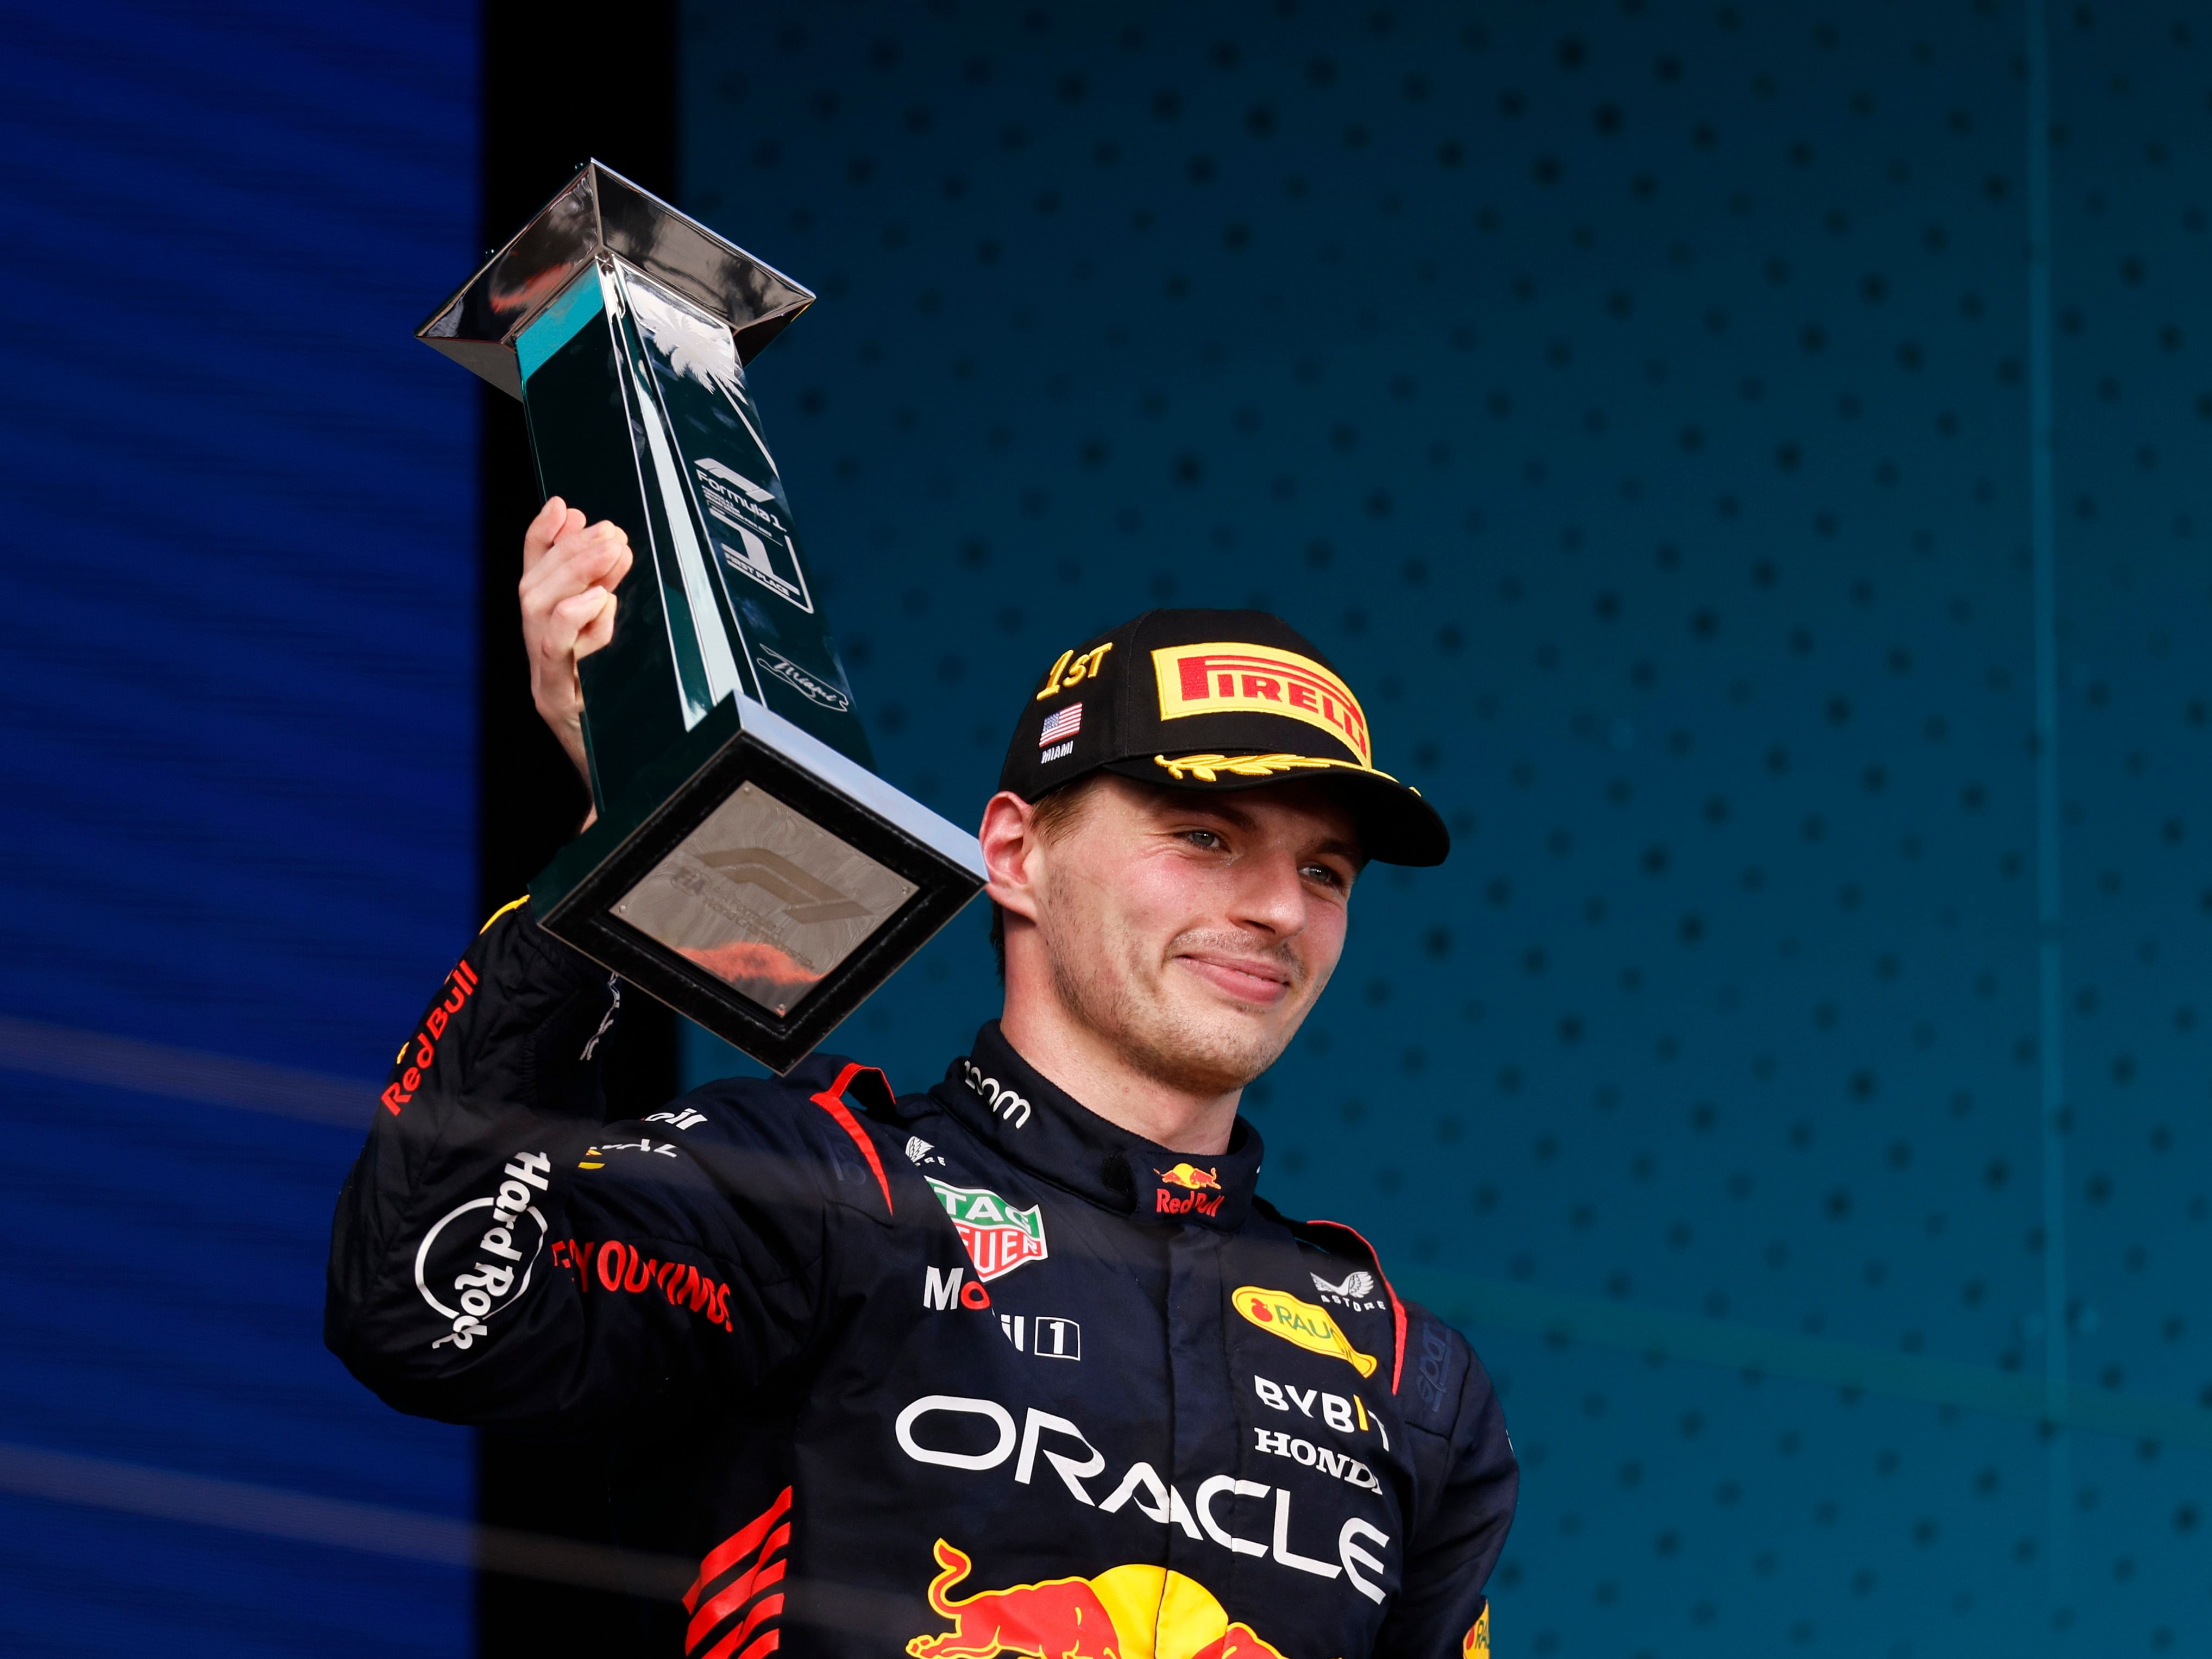 Race winner Max Verstappen celebrates on the podium during the 2023 F1 Miami Grand Prix. (Photo by Chris Graythen/Getty Images)